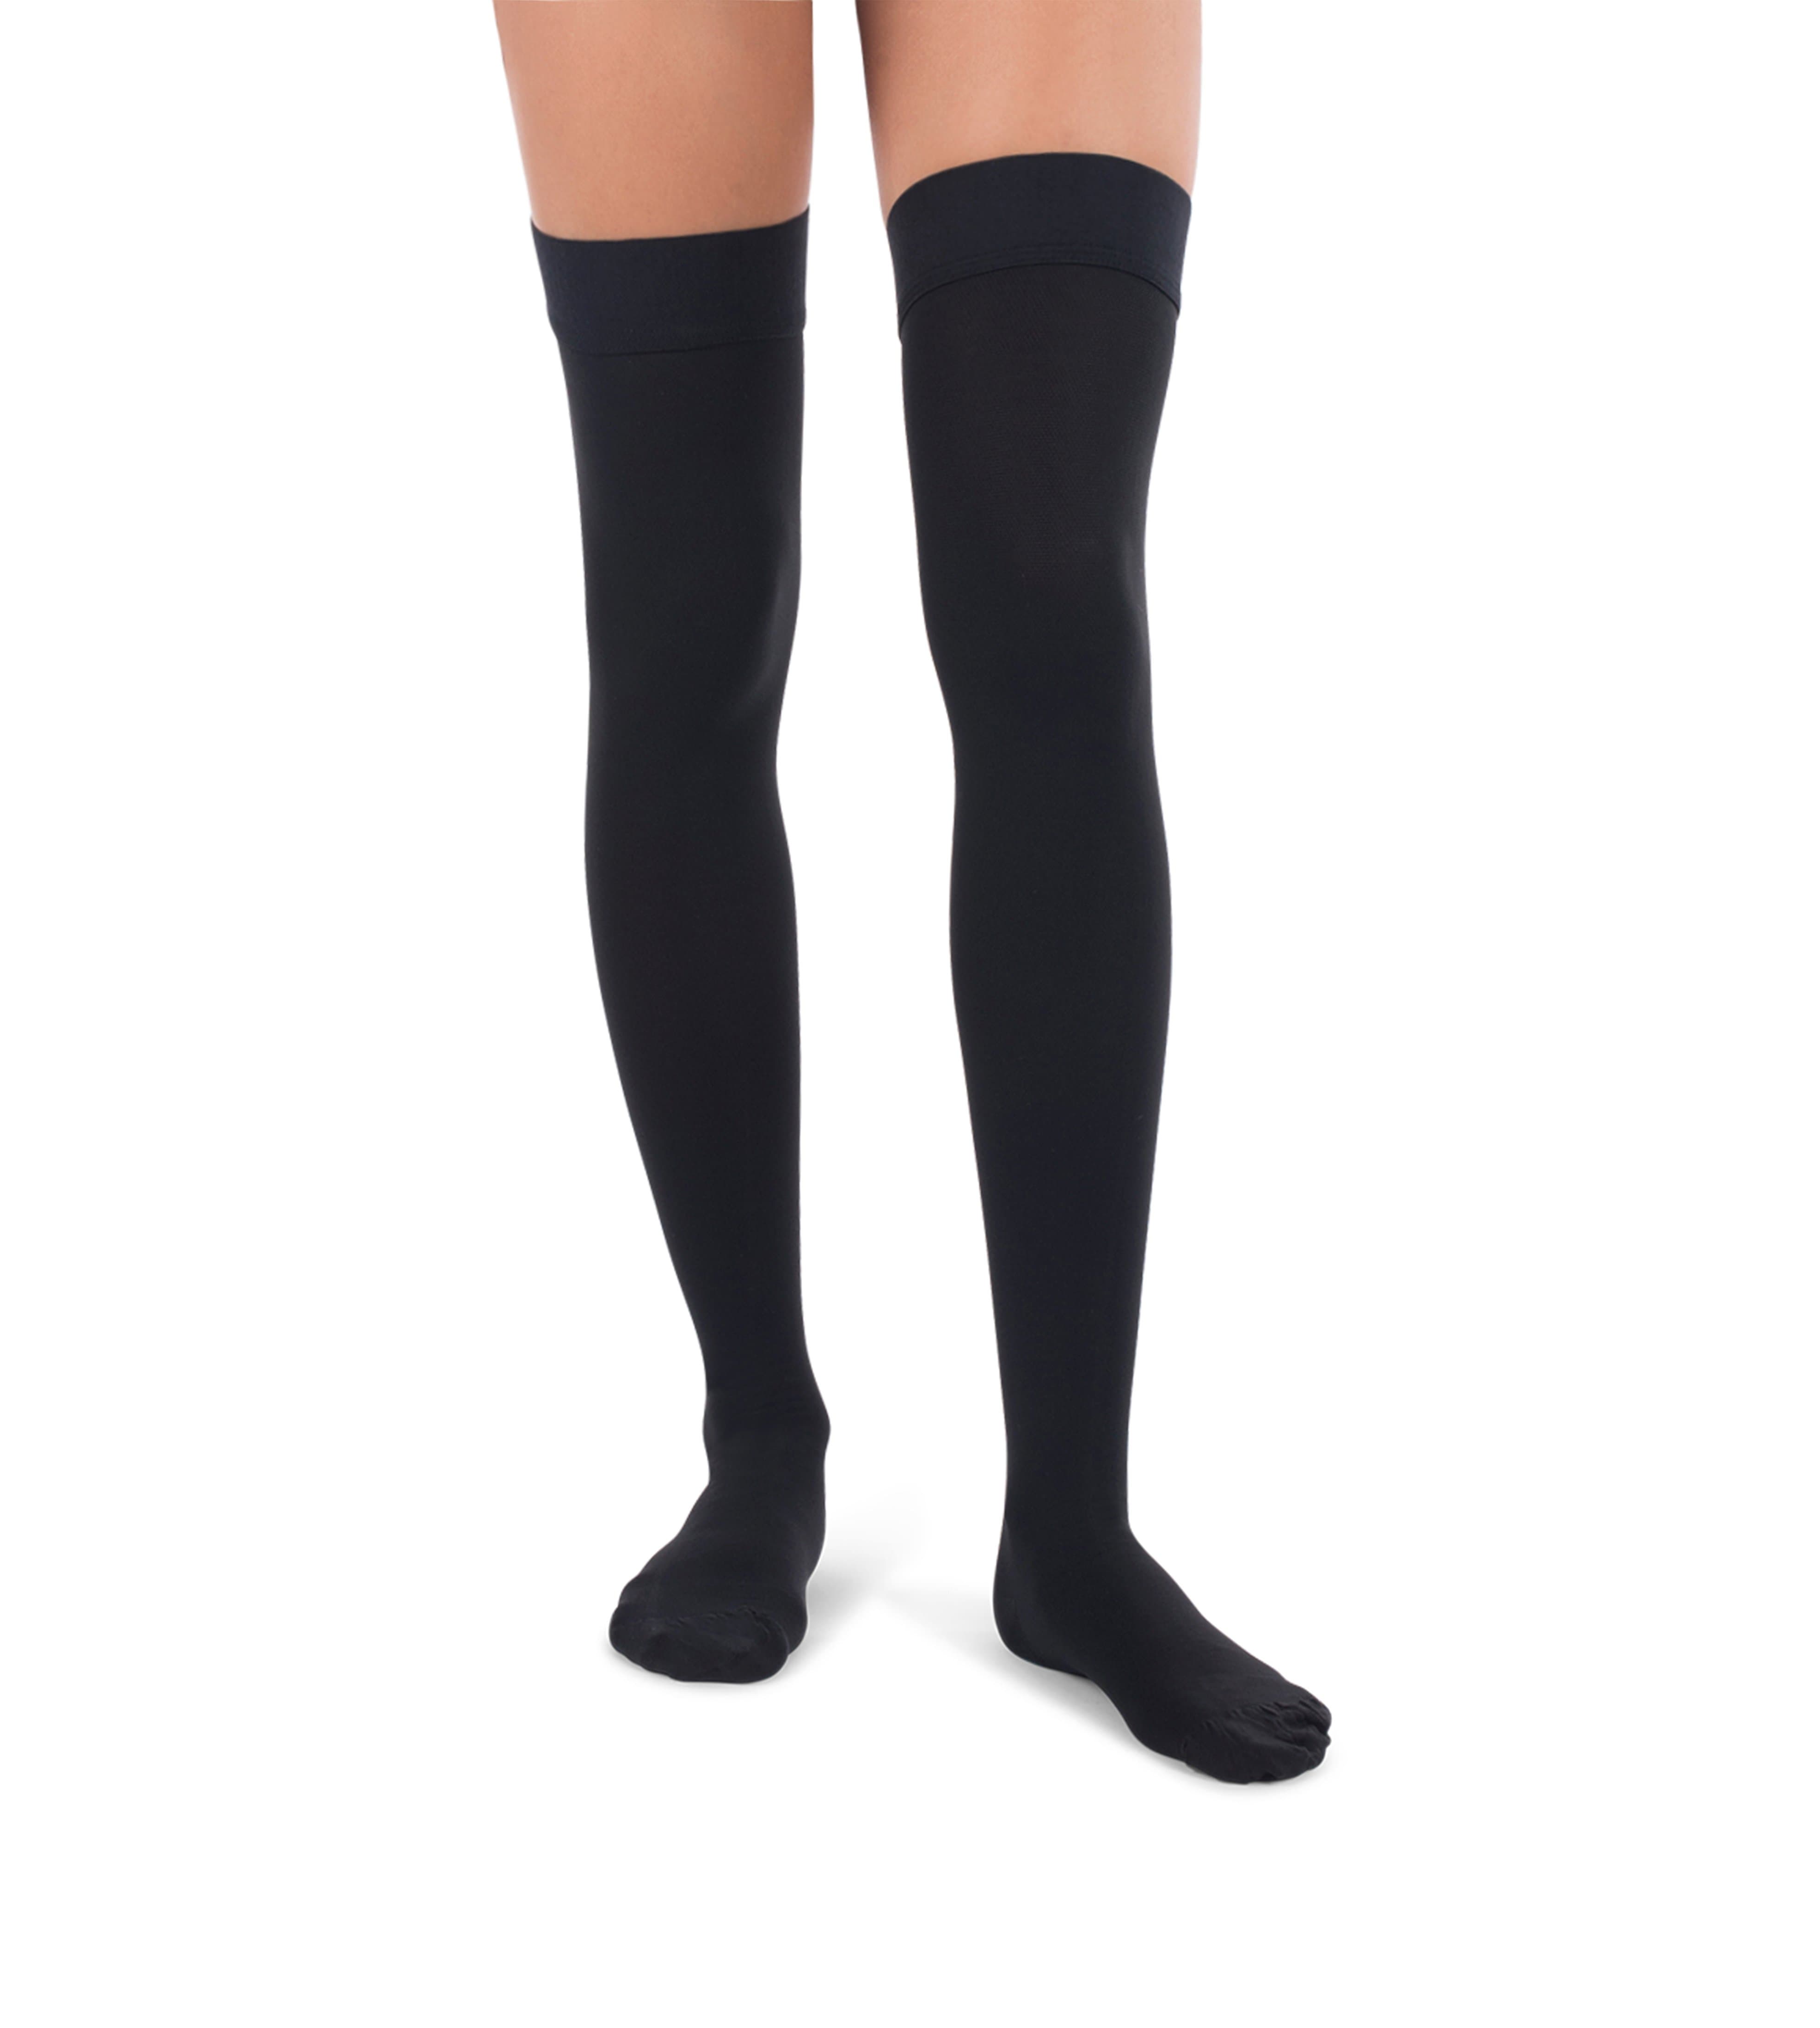 JOMI Thigh High Compression Stockings, 20-30mmHg Premiere Surgical Weight Closed Toe - PETITE 265 - 